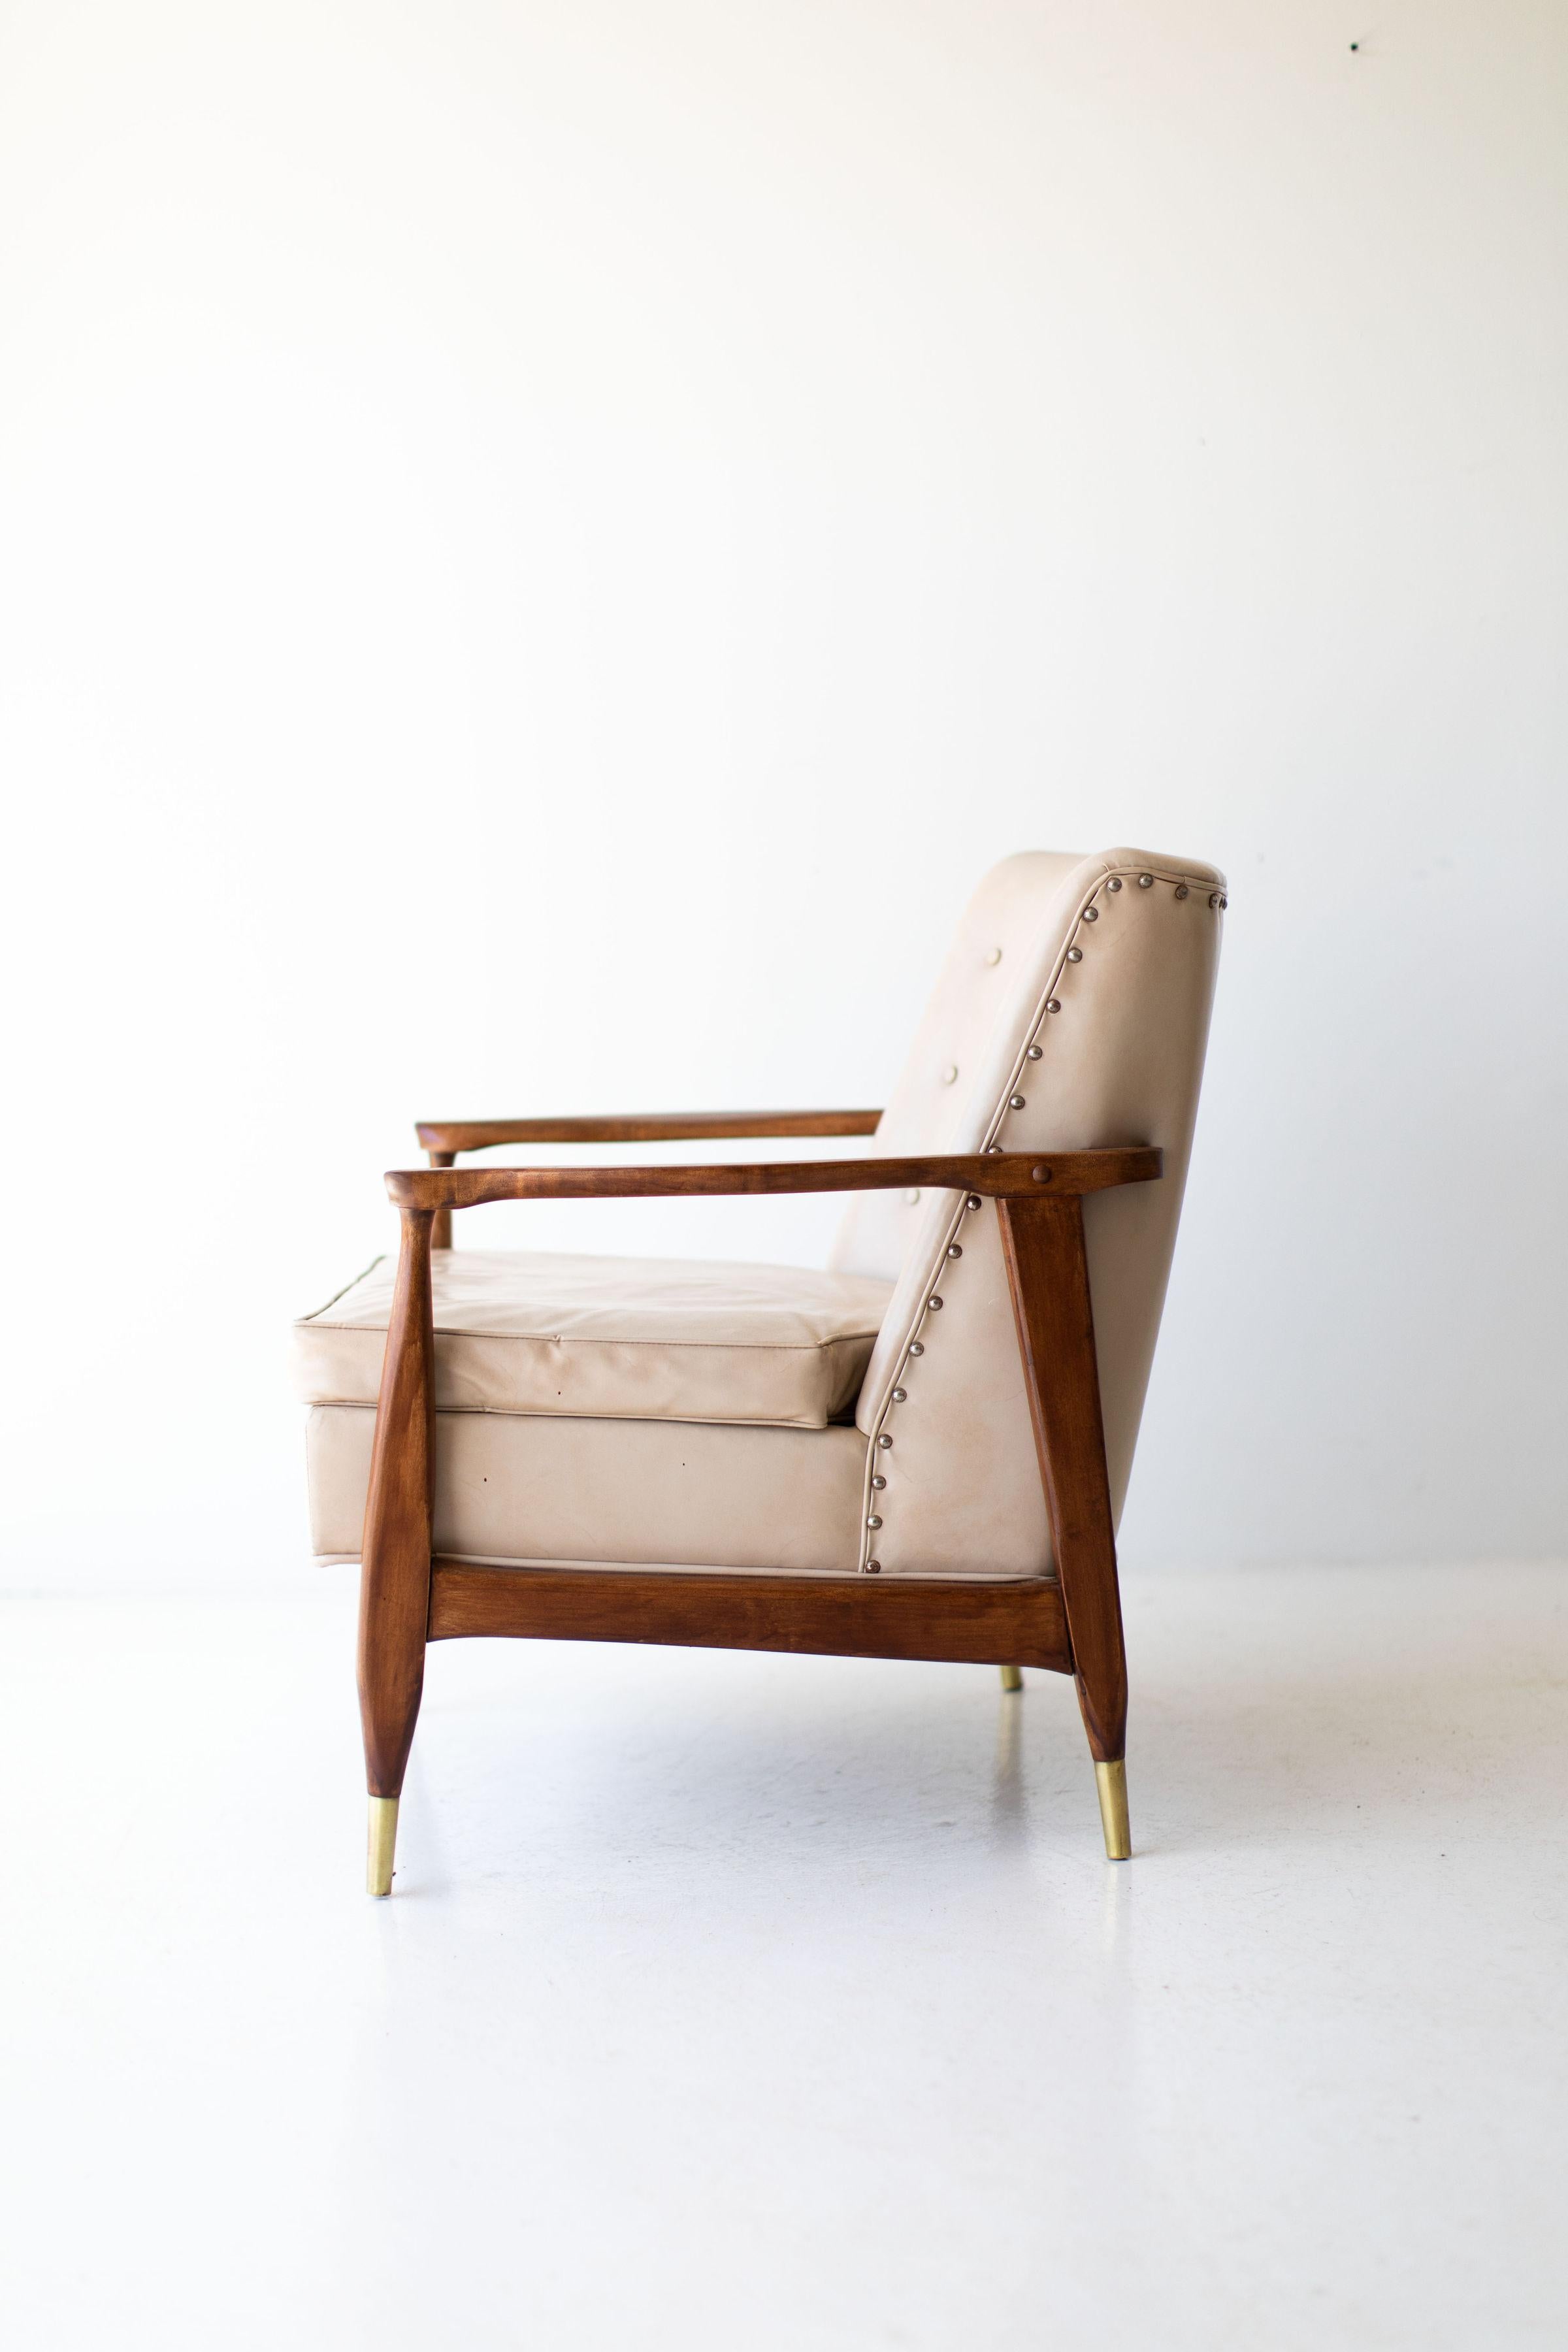 Designer: Lawrence Peabody. 

Manufacturer: Nemschoff.
Period or model: Mid-Century Modern. 
Specs: Wood, Vinyl

Condition: 

This Lawrence Peabody lounge chair for Nemschoff is in original condition. The chair retains its original vinyl